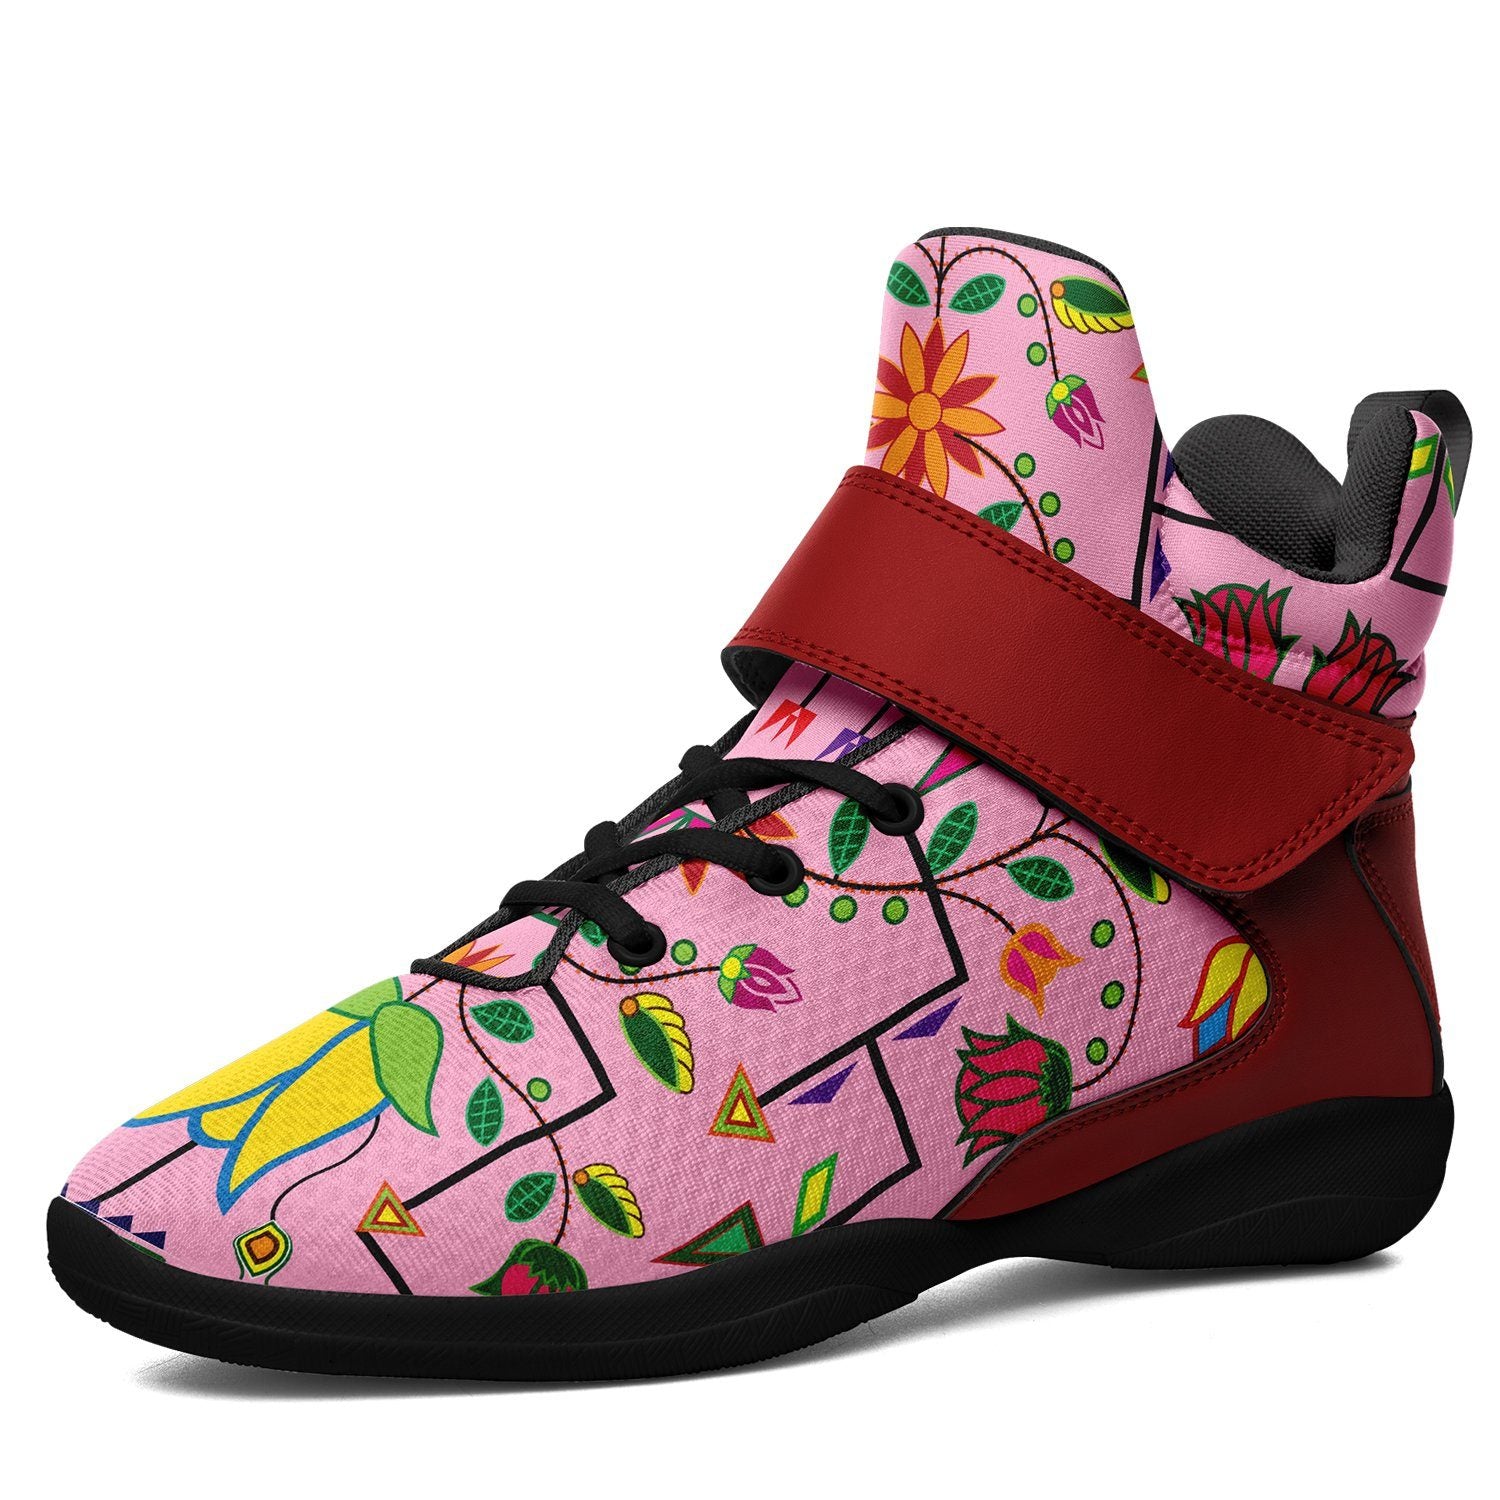 Geometric Floral Summer Sunset Kid's Ipottaa Basketball / Sport High Top Shoes 49 Dzine US Women 4.5 / US Youth 3.5 / EUR 35 Black Sole with Dark Red Strap 